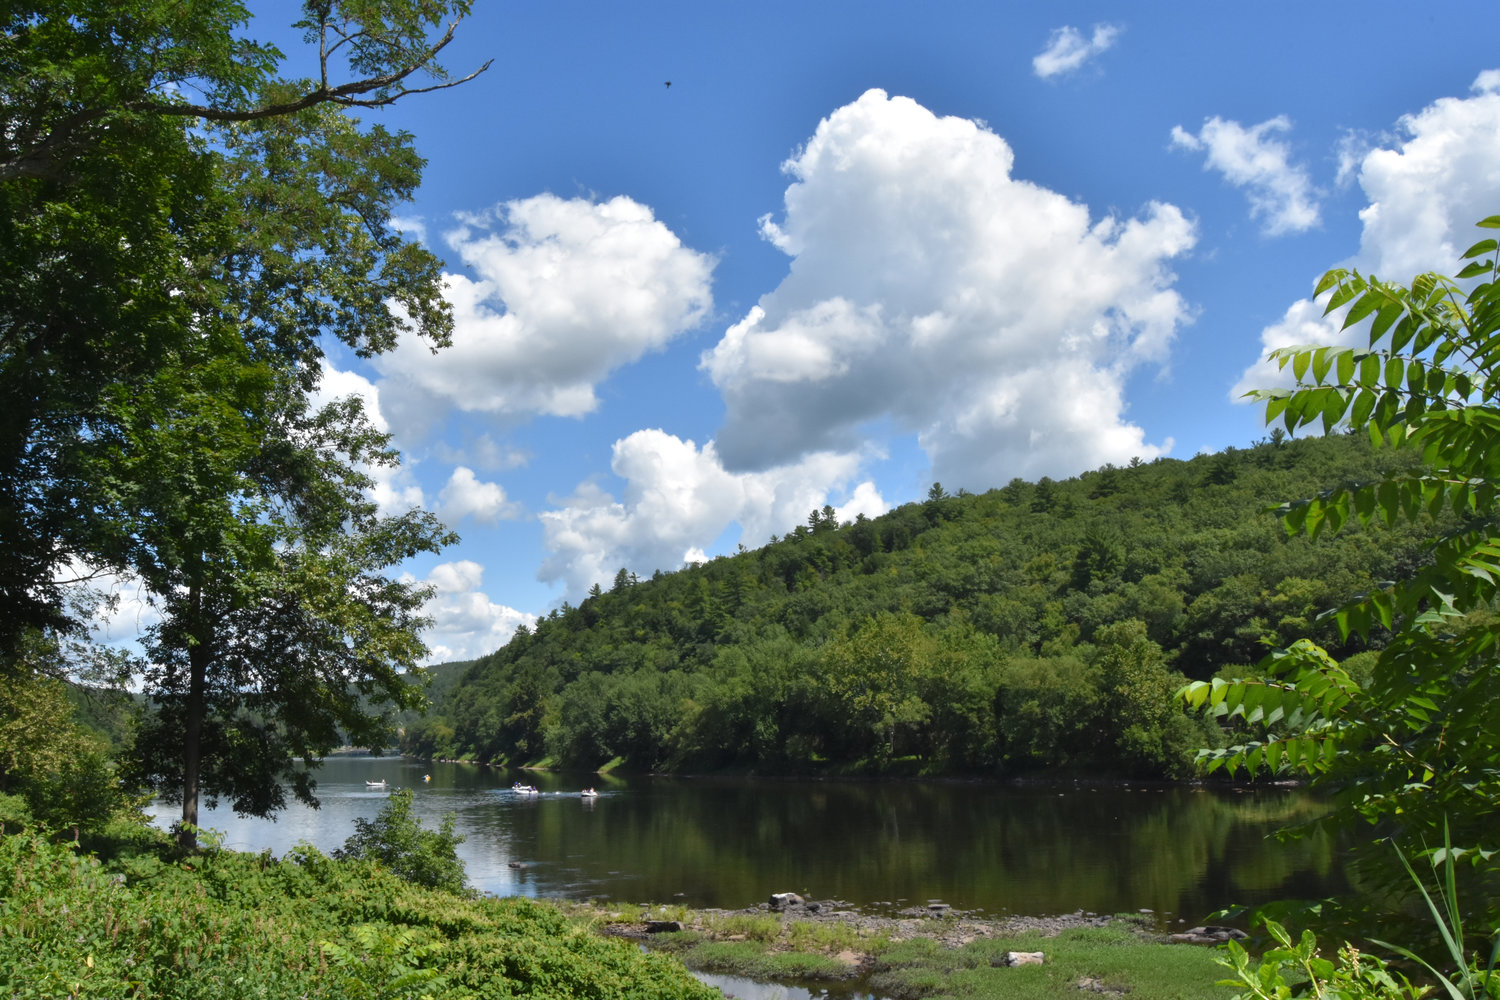 Who would want to protect the Delaware River and the natural resources of its watershed? With the reversal of the Delaware River Basin Commission’s recent fracking ban, the pressure to leave a healthy legacy for future generations has been lifted. What a relief!